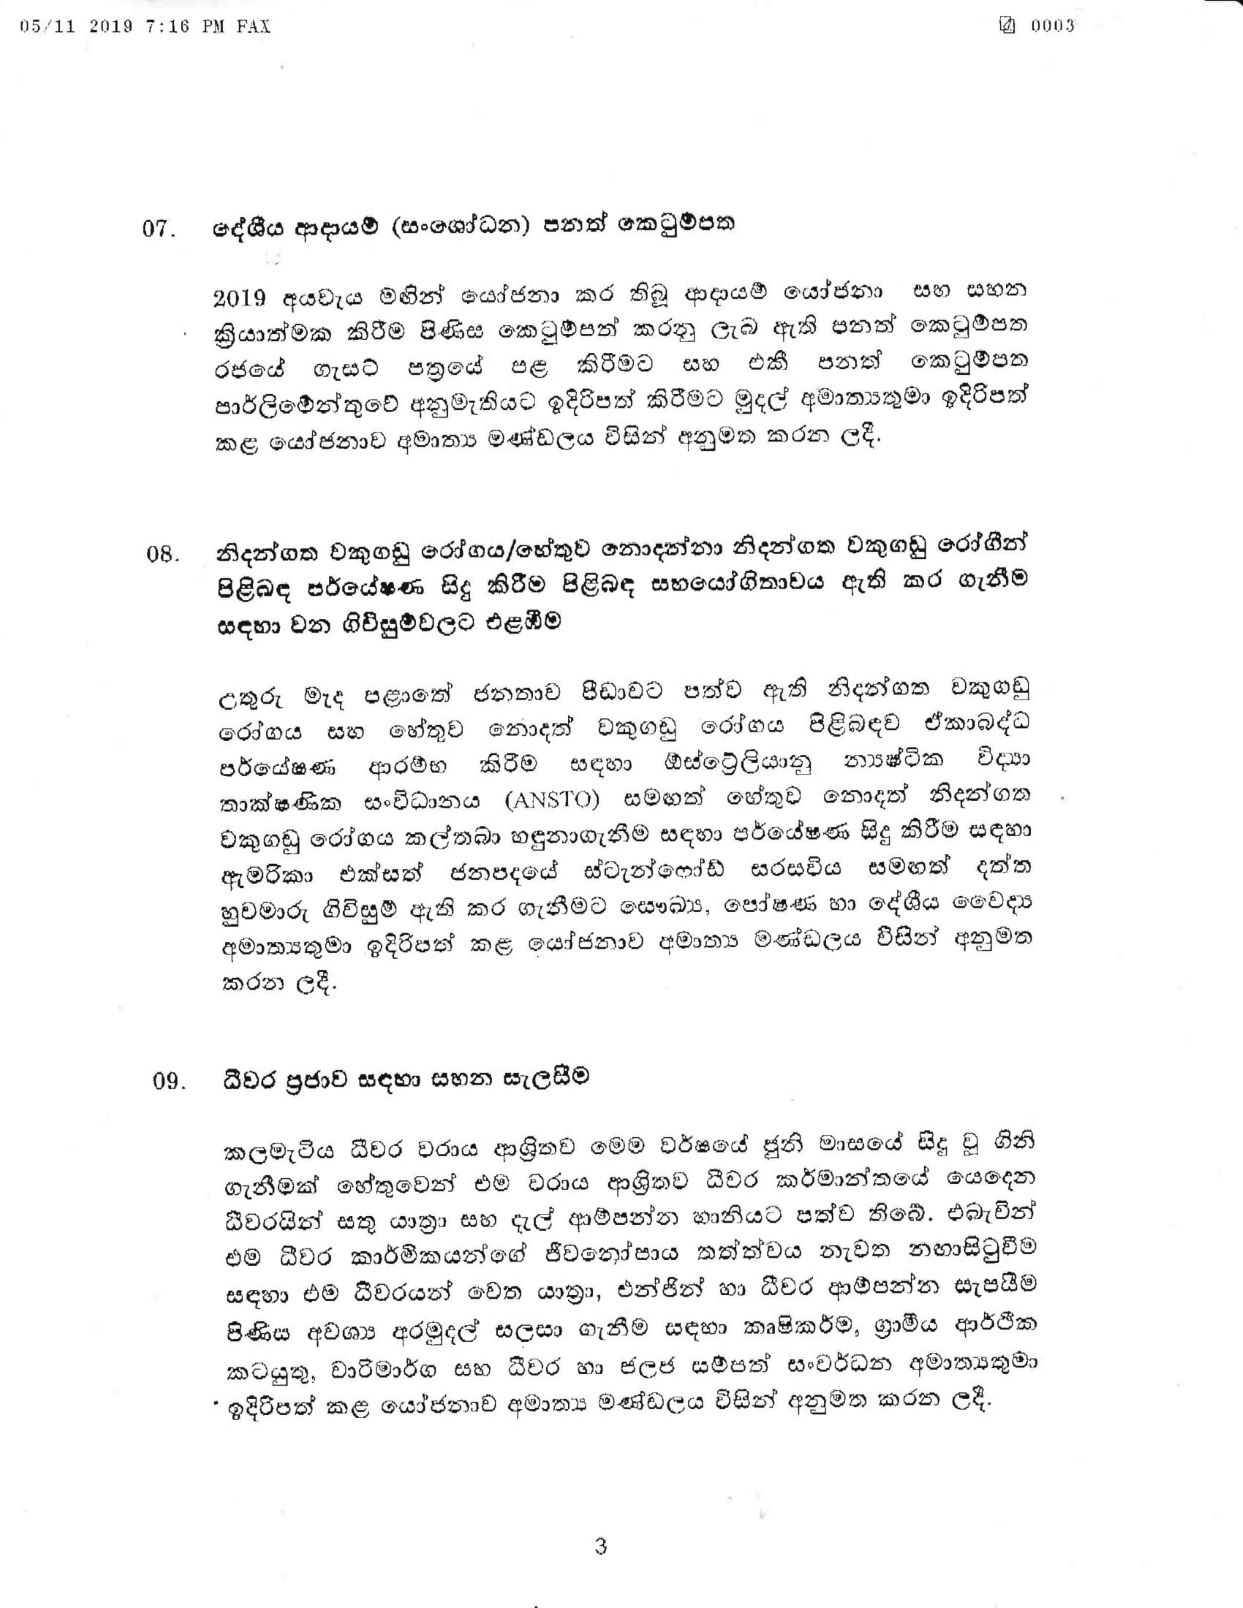 Cabinet Decision on 05.11.2019 03